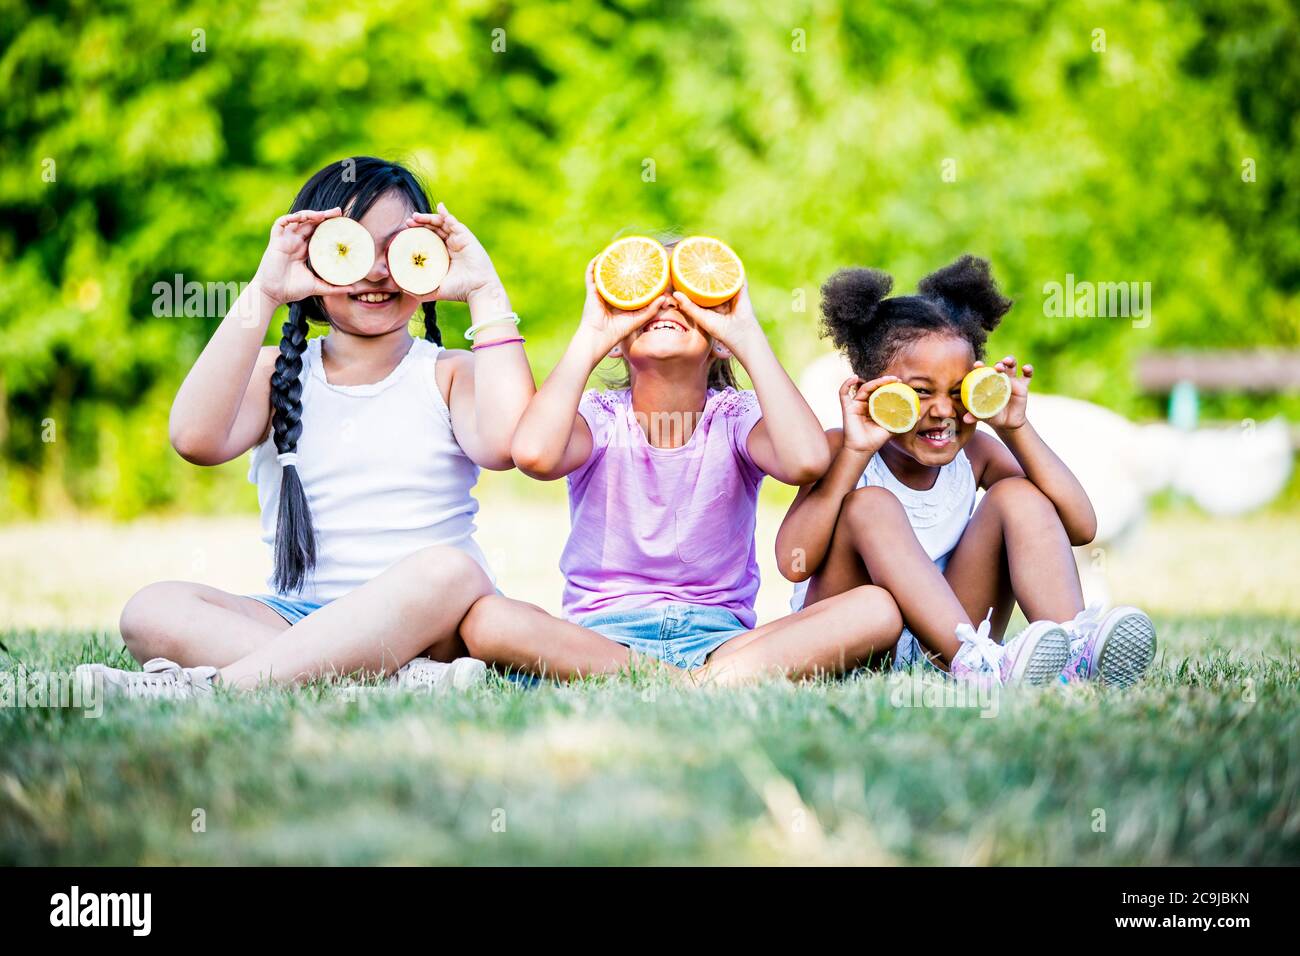 Girls sitting side by side in park and covering their eyes with fruit slices, smiling. Stock Photo